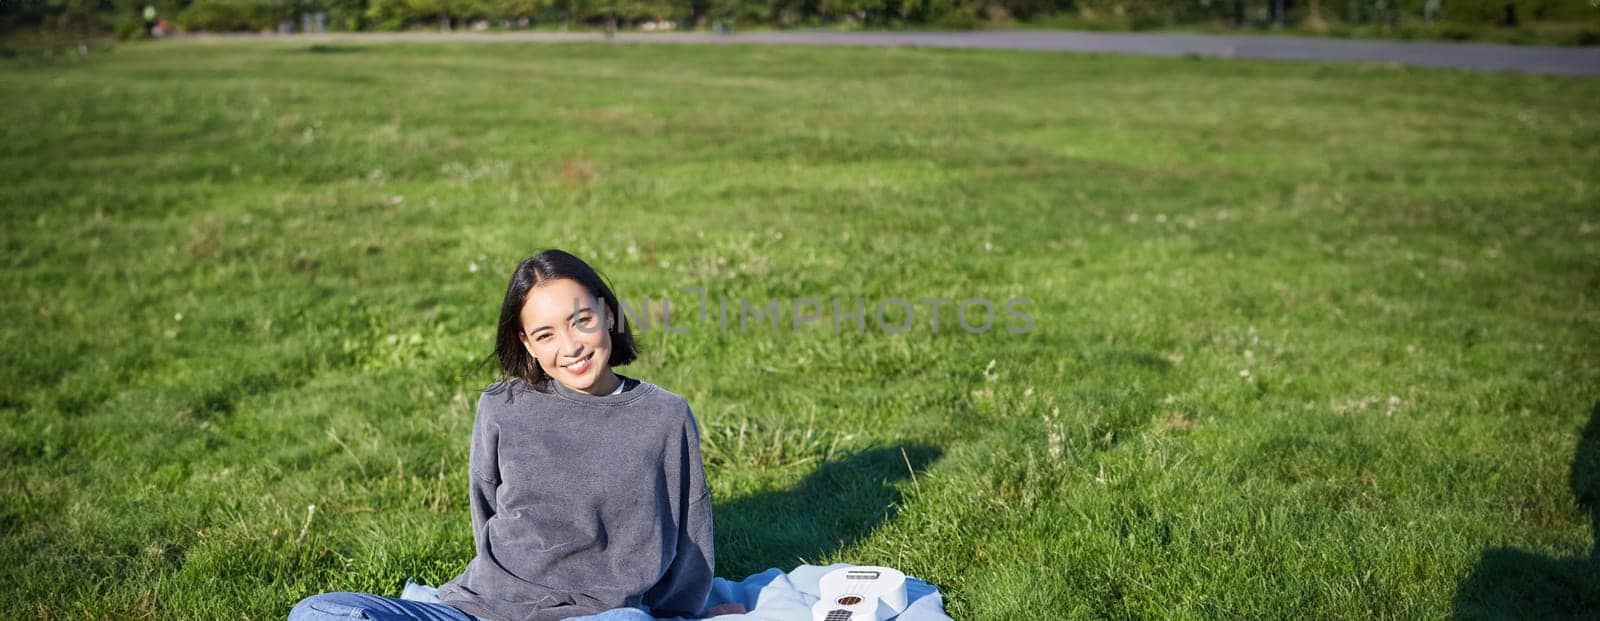 Vertical shot of smiling asian girl sitting on blanket with ukulele guitar, relaxing on sunny day outdoors, resting in park.